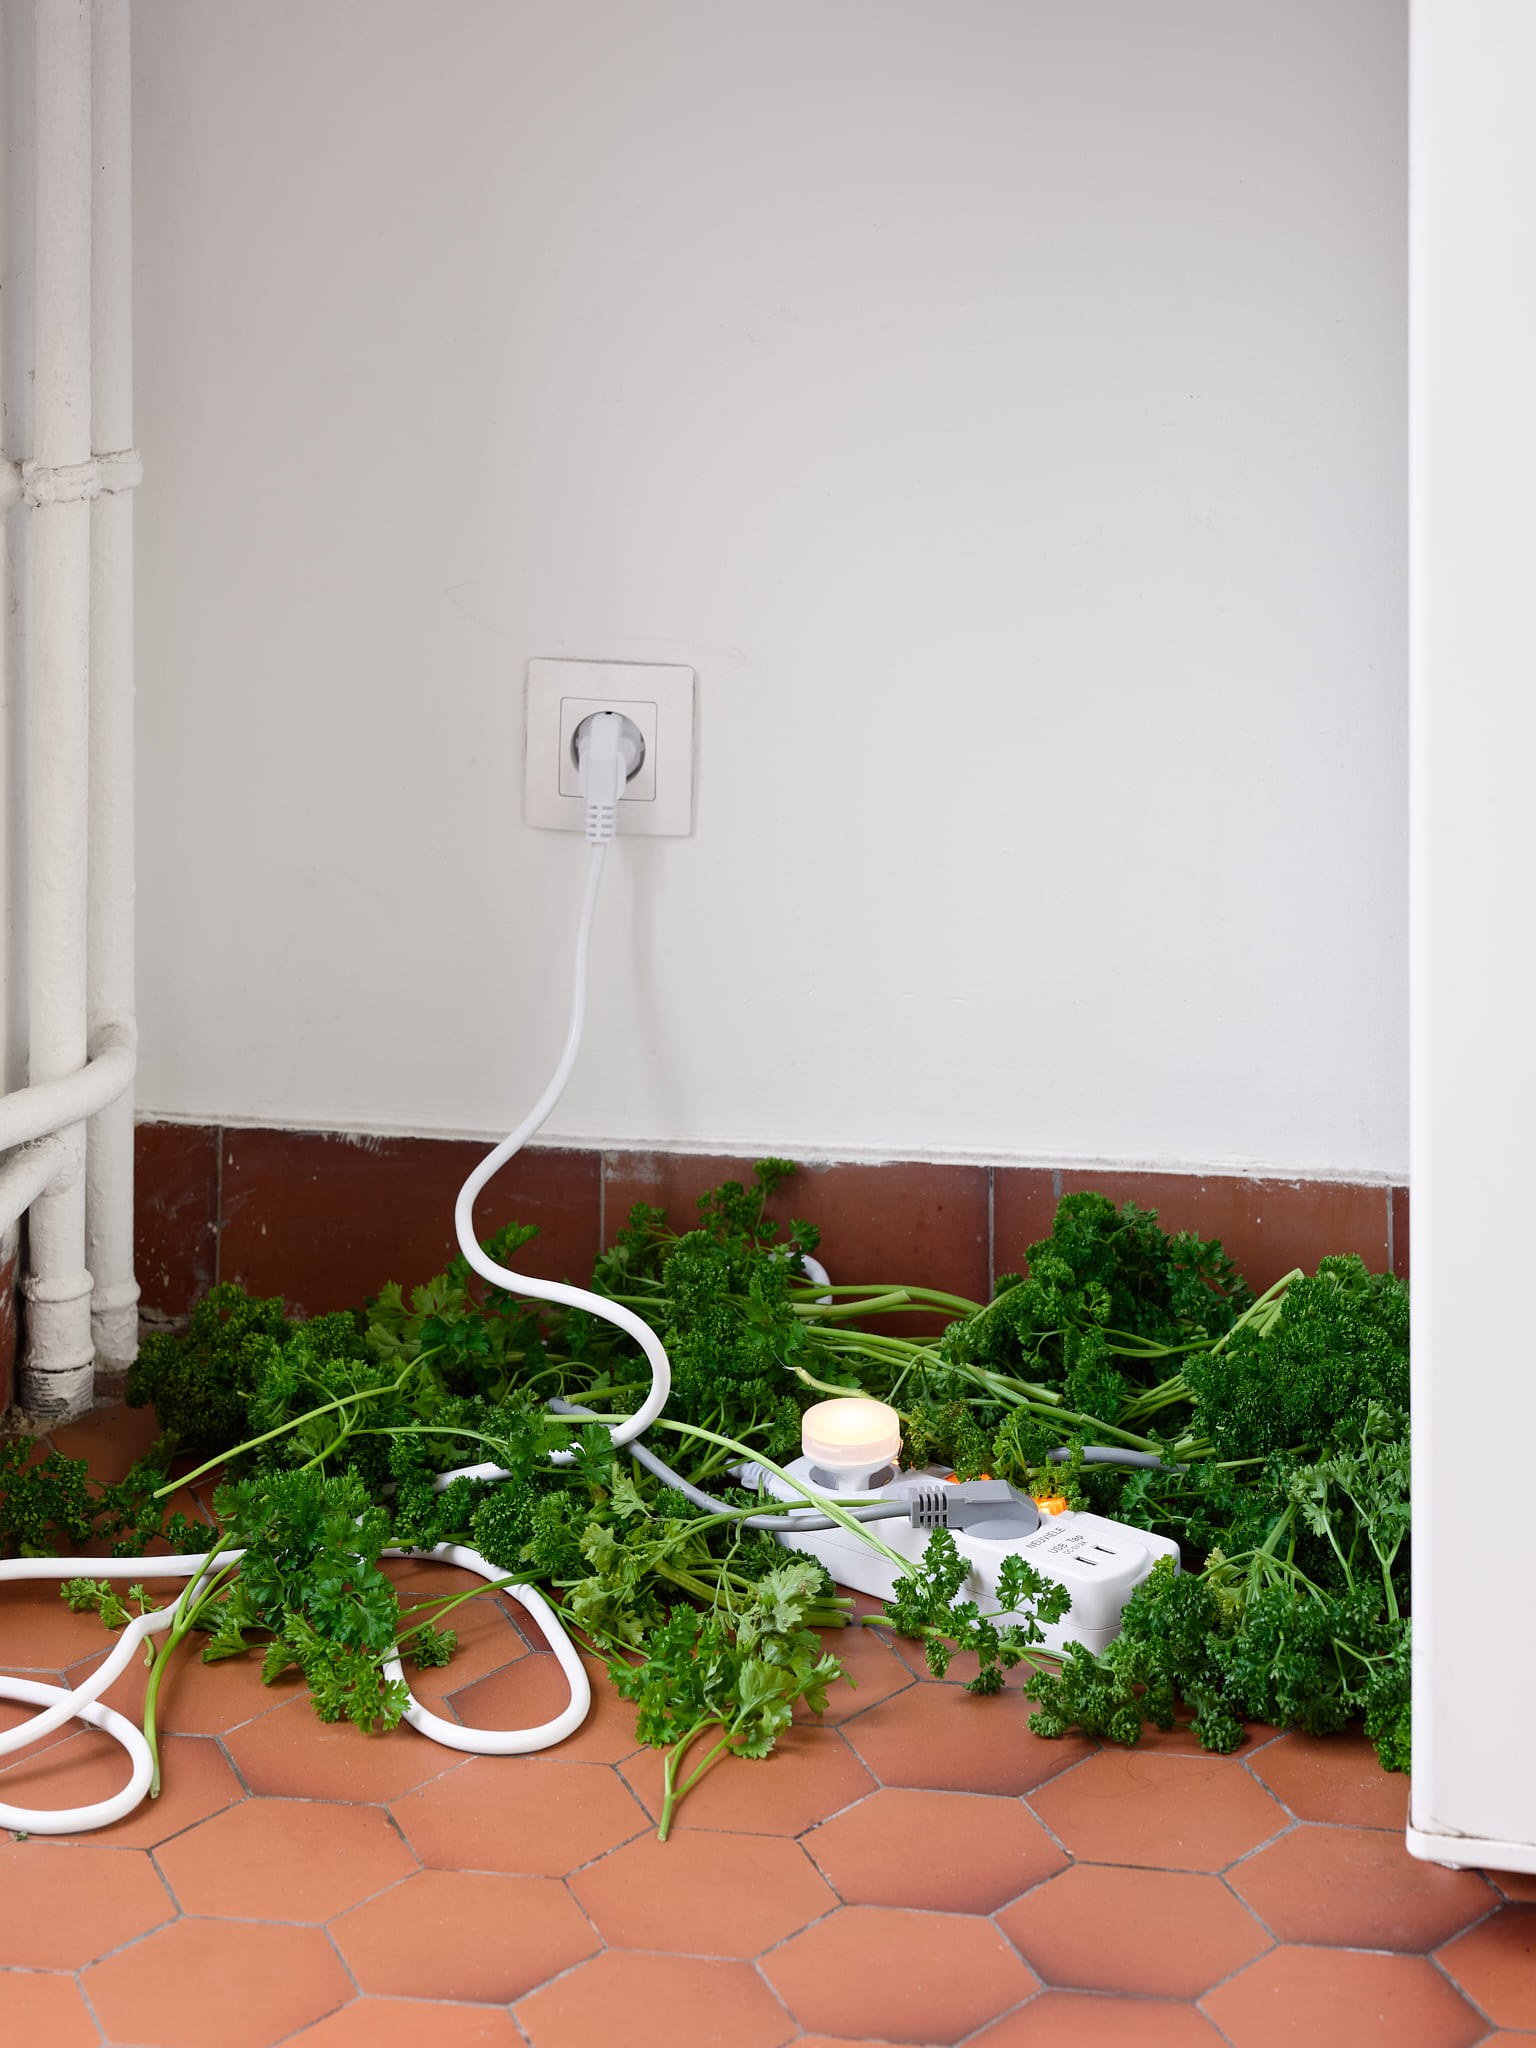 Andréa Spartà, parsley, powerstrip, nightlight, exhibition view 